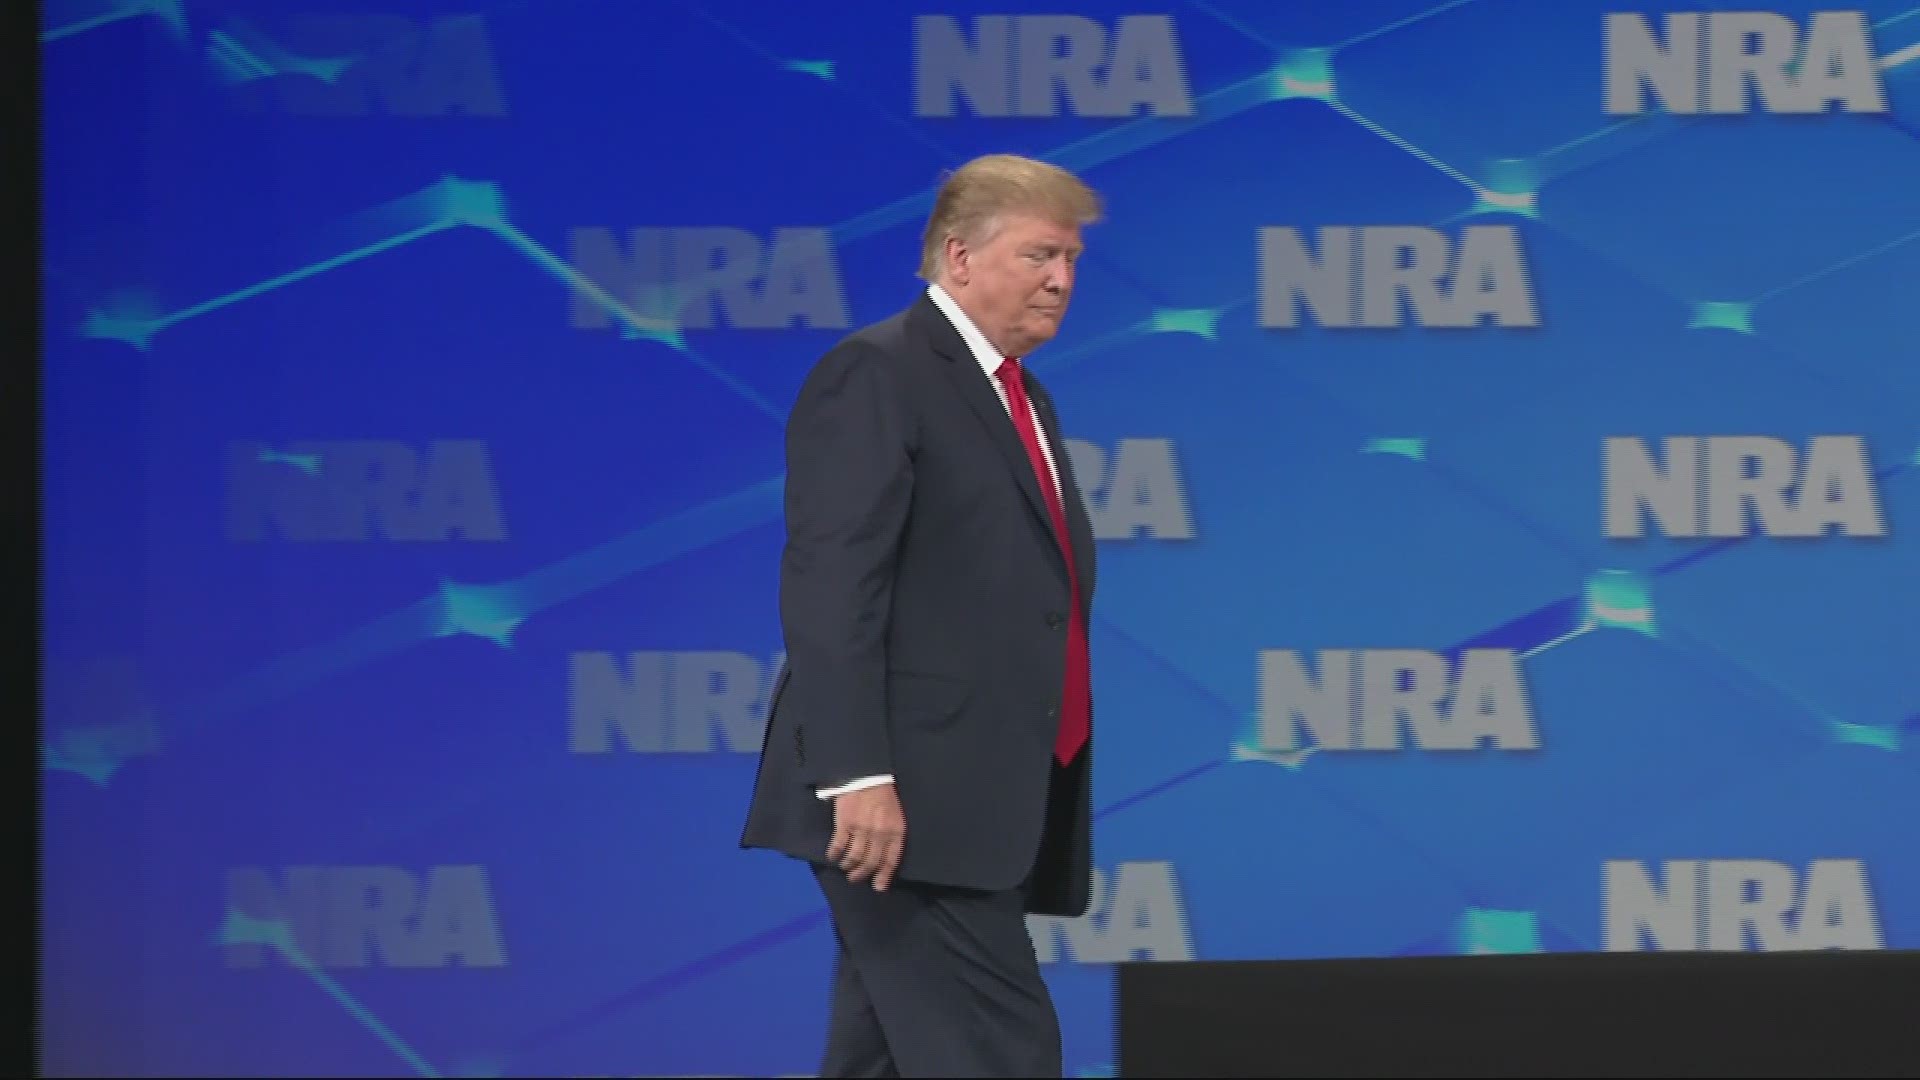 President Donald Trump is launching his speech to the National Rifle Association with a recitation of grievances about special counsel Robert Mueller's investigation (AP).